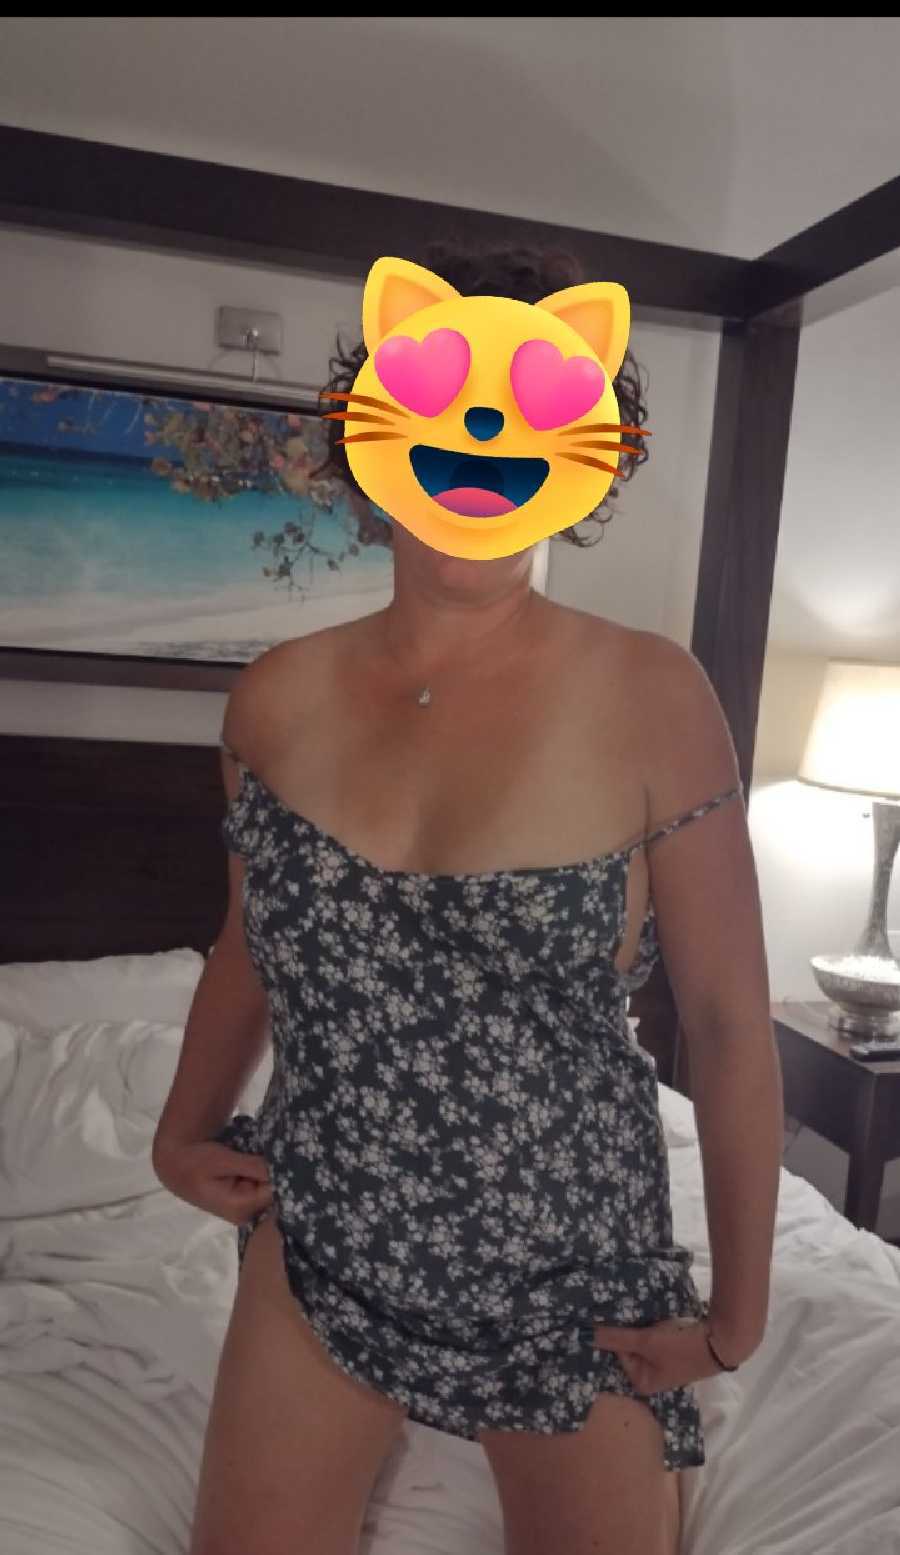 Her Sexy Dress at the Resort Naked